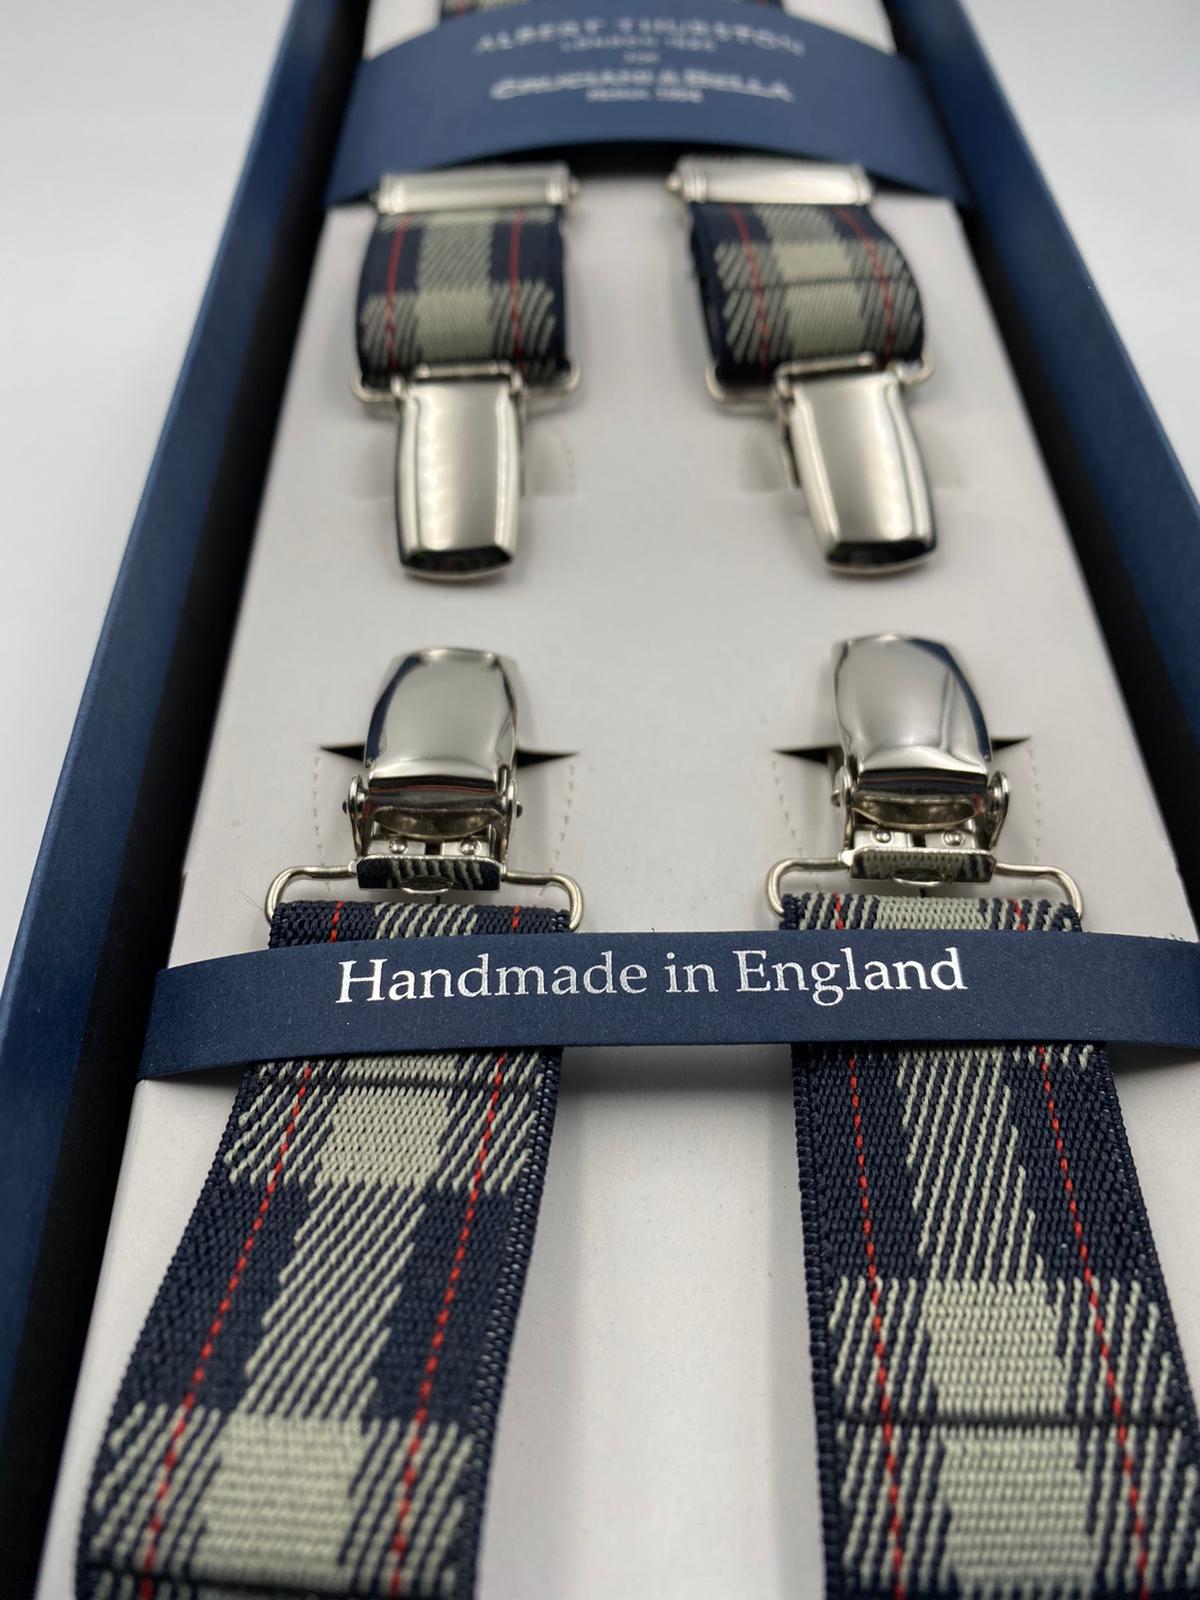 Albert Thurston for Cruciani & Bella Made in England Clip on Adjustable Sizing 25 mm elastic braces Blue, Grey and Red Tartan X-Shaped Nickel Fittings Size: L #4858